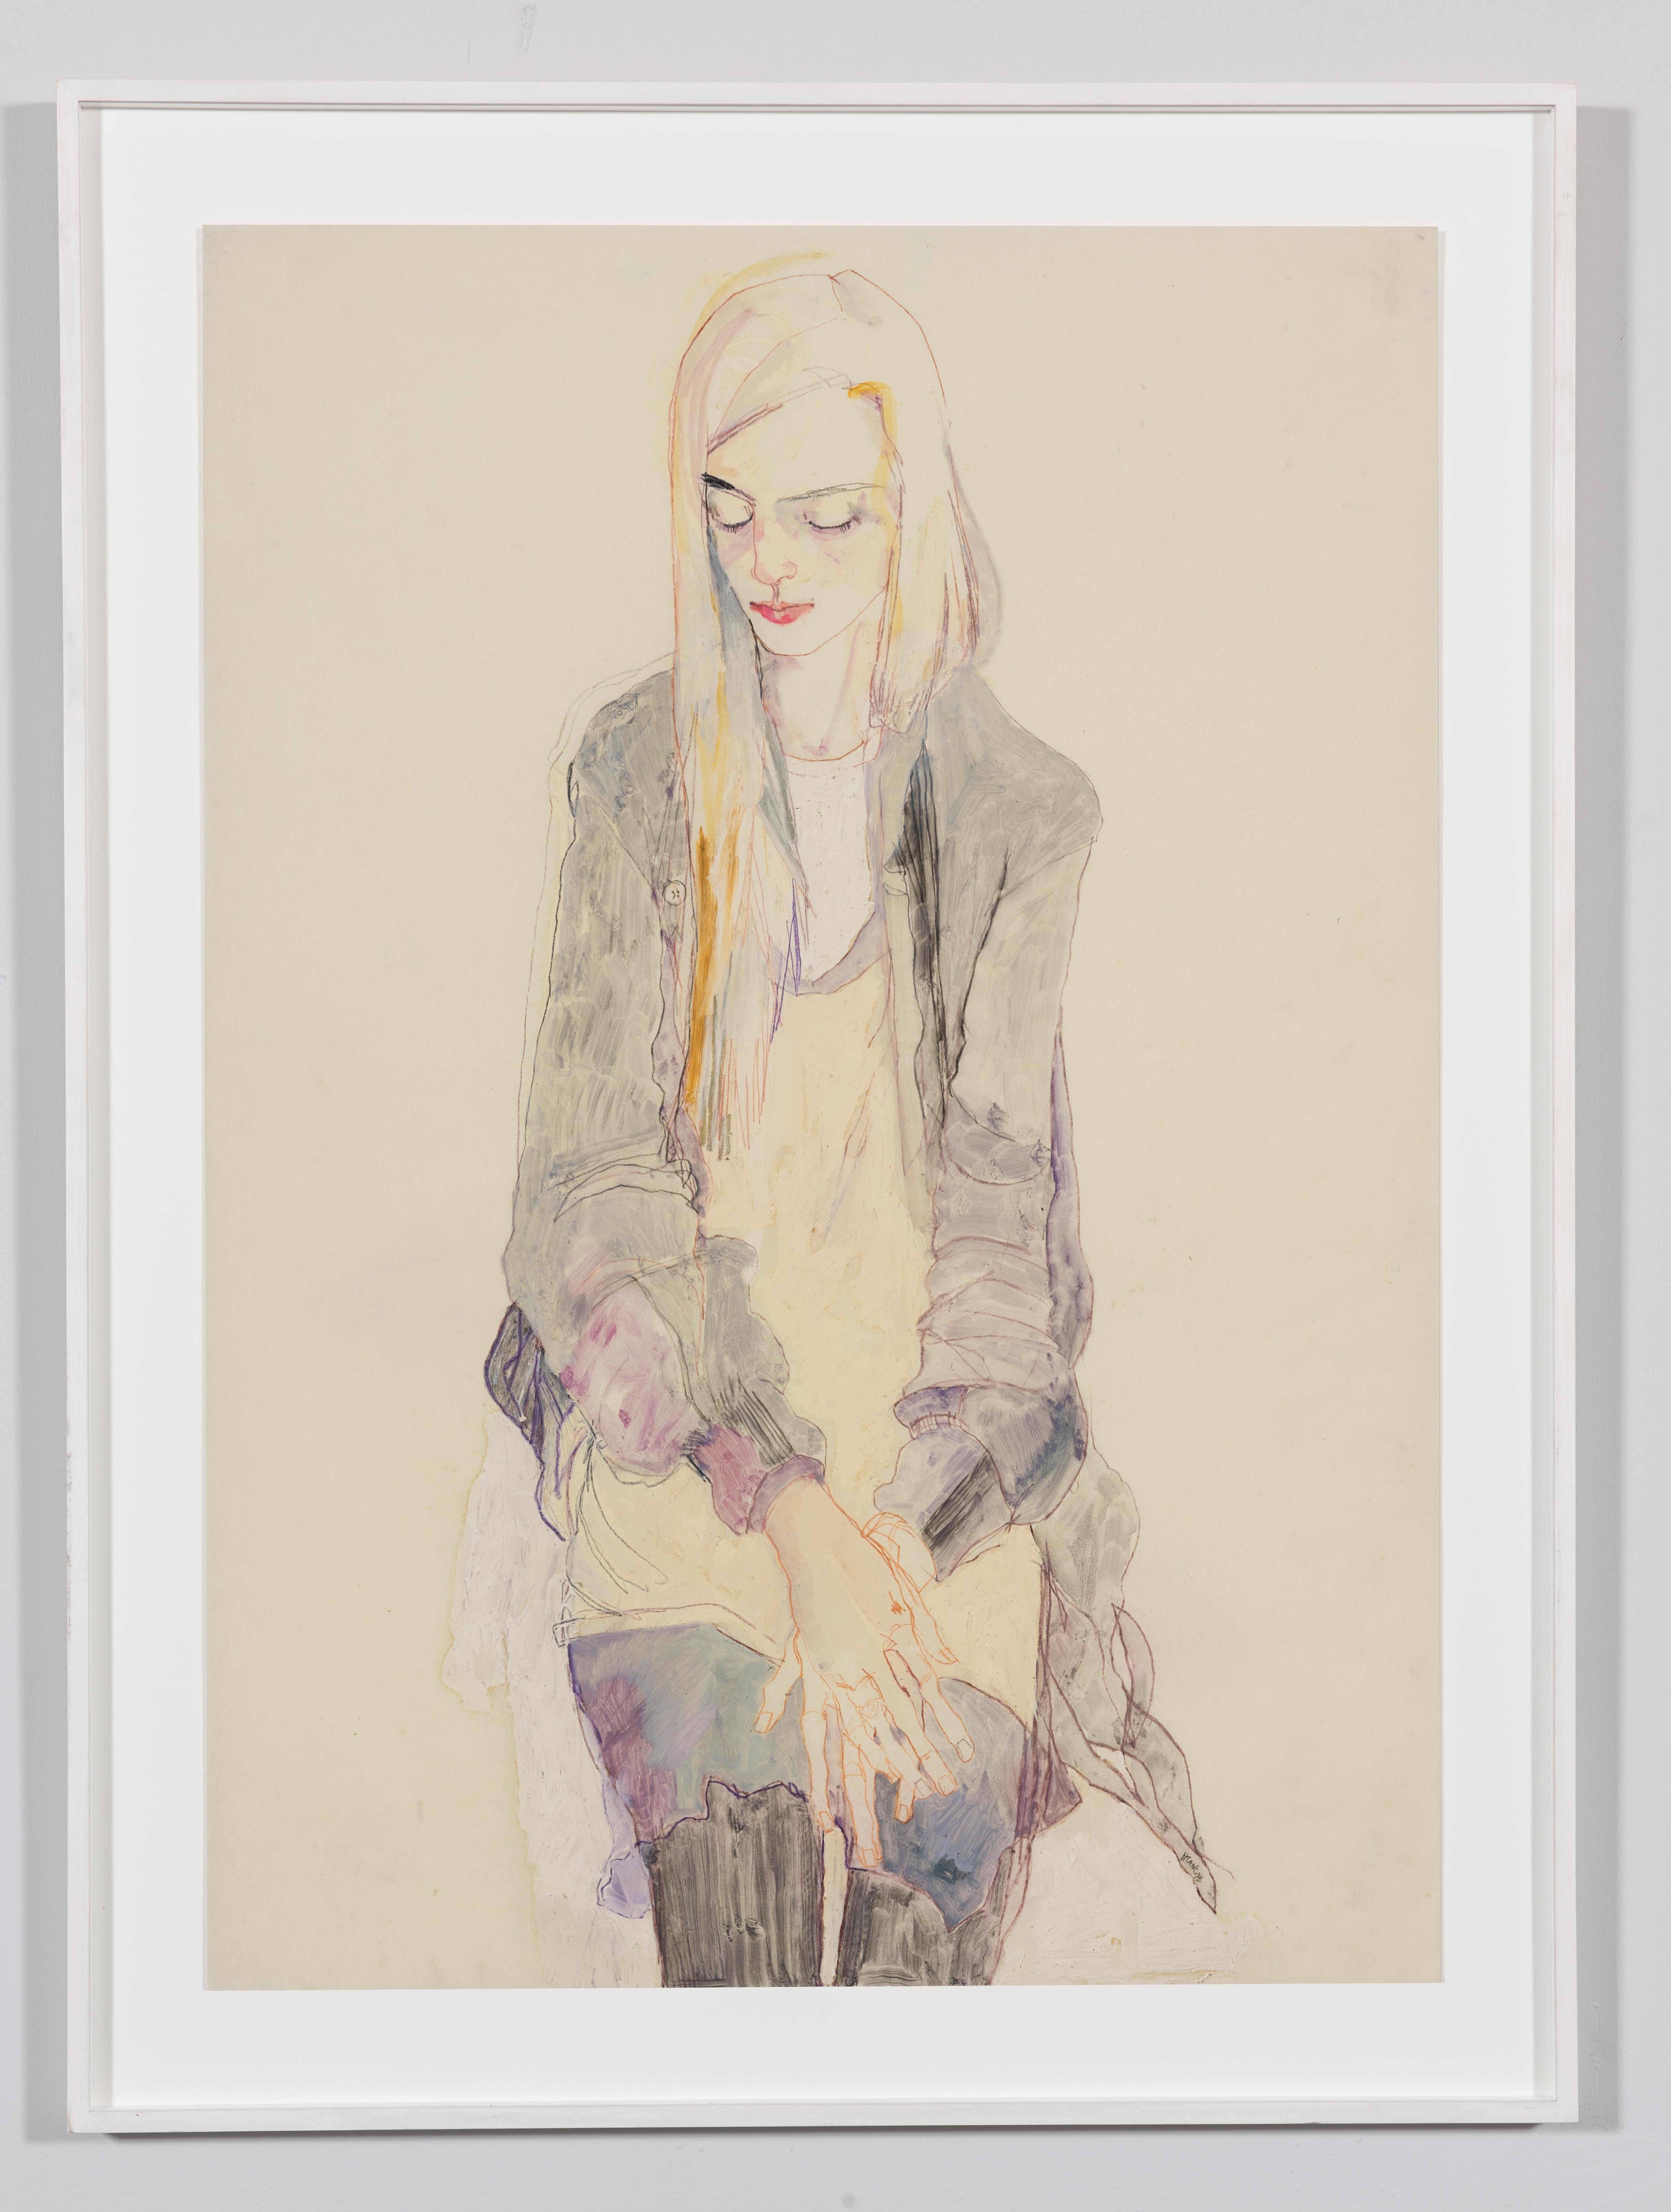 Elodie (Sitting, Looking Down), Mixed media on Pergamenata parchment - Art by Howard Tangye